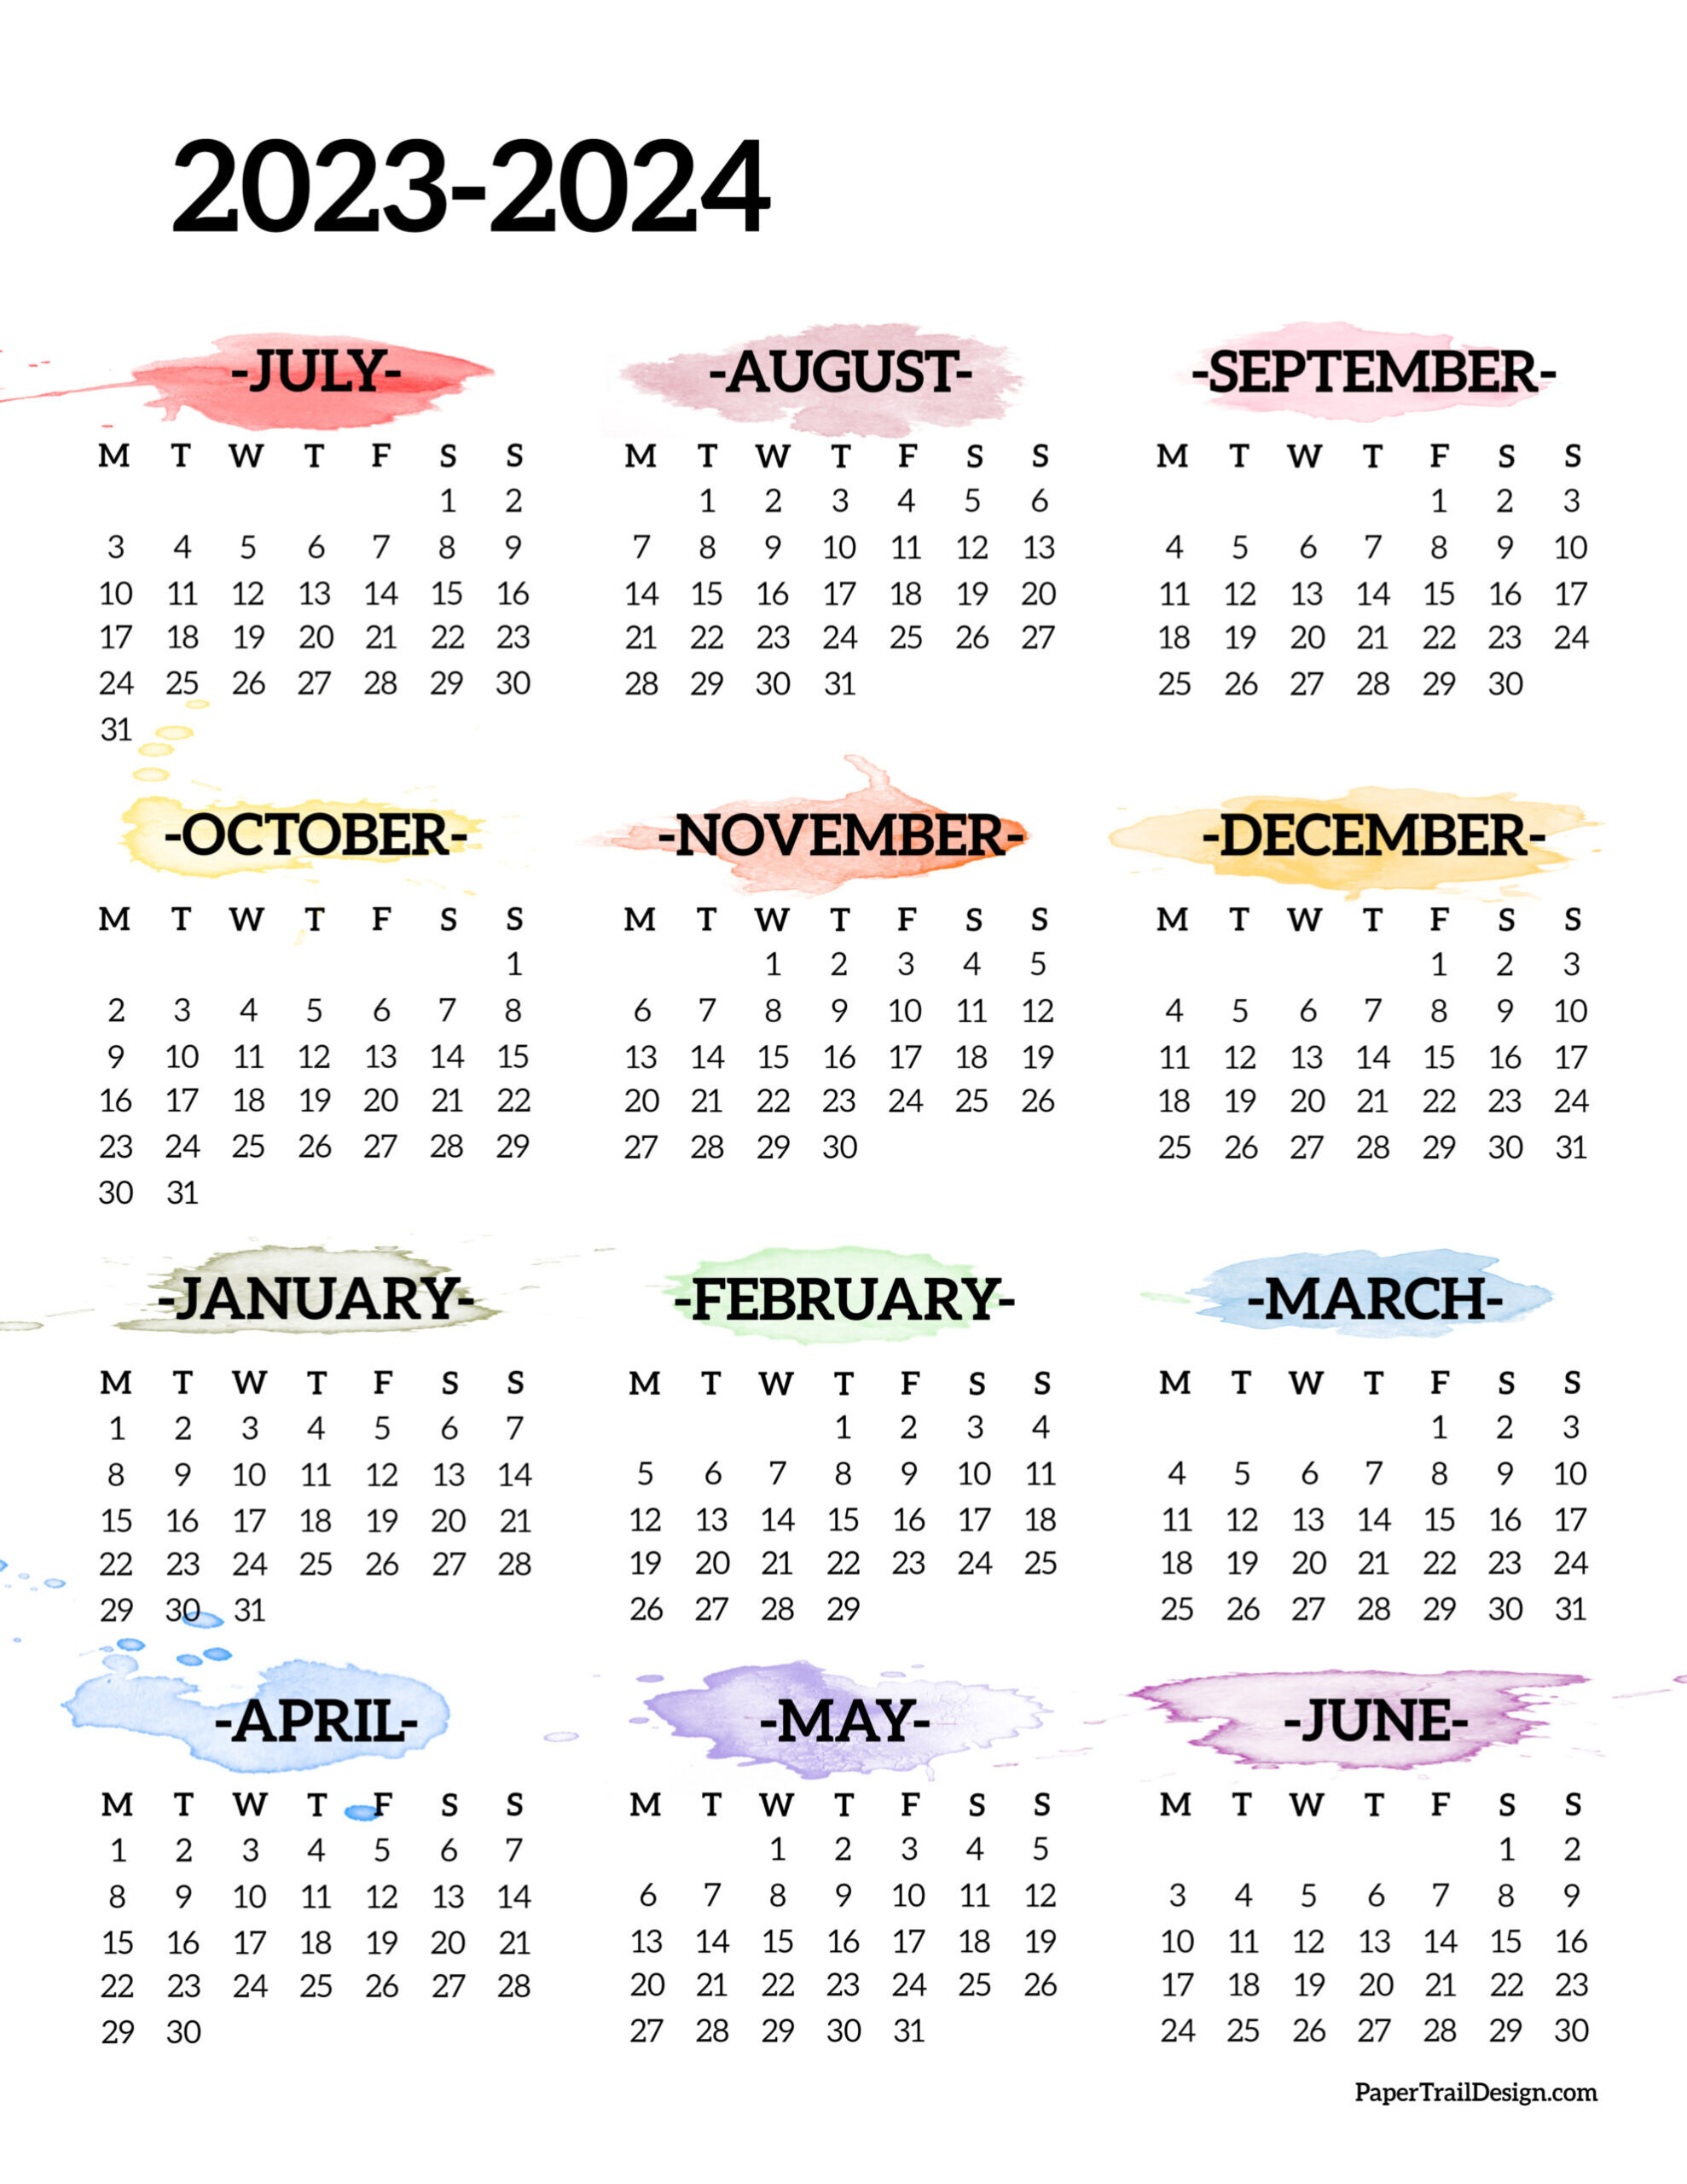 2023-2024 School Year Calendar Free Printable - Paper Trail Design in Yearly Calendar July 2023 To June 2024